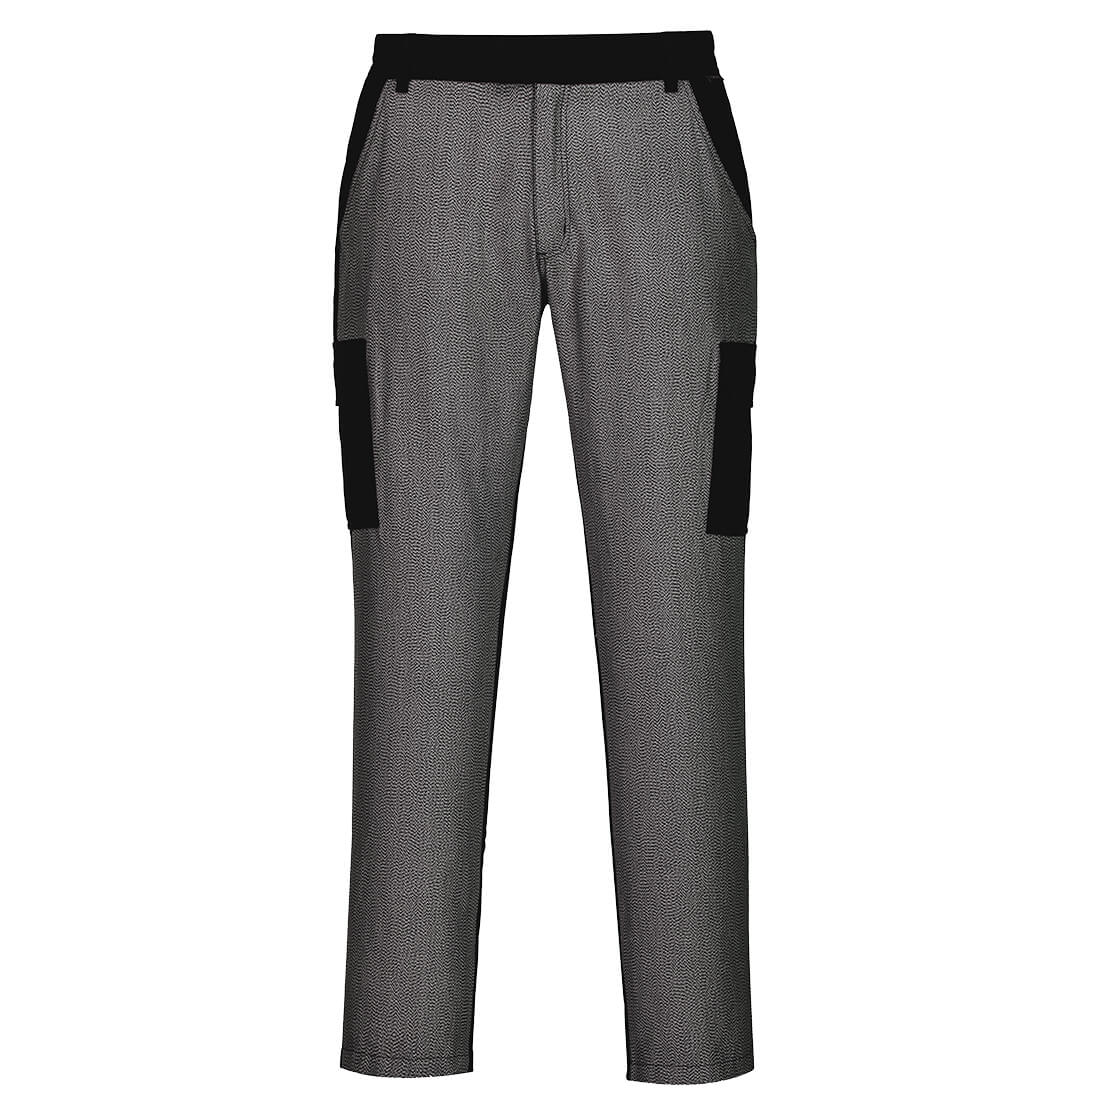 Combat Trouser with Cut Resistant Front - arbeitskleidung-gmbh